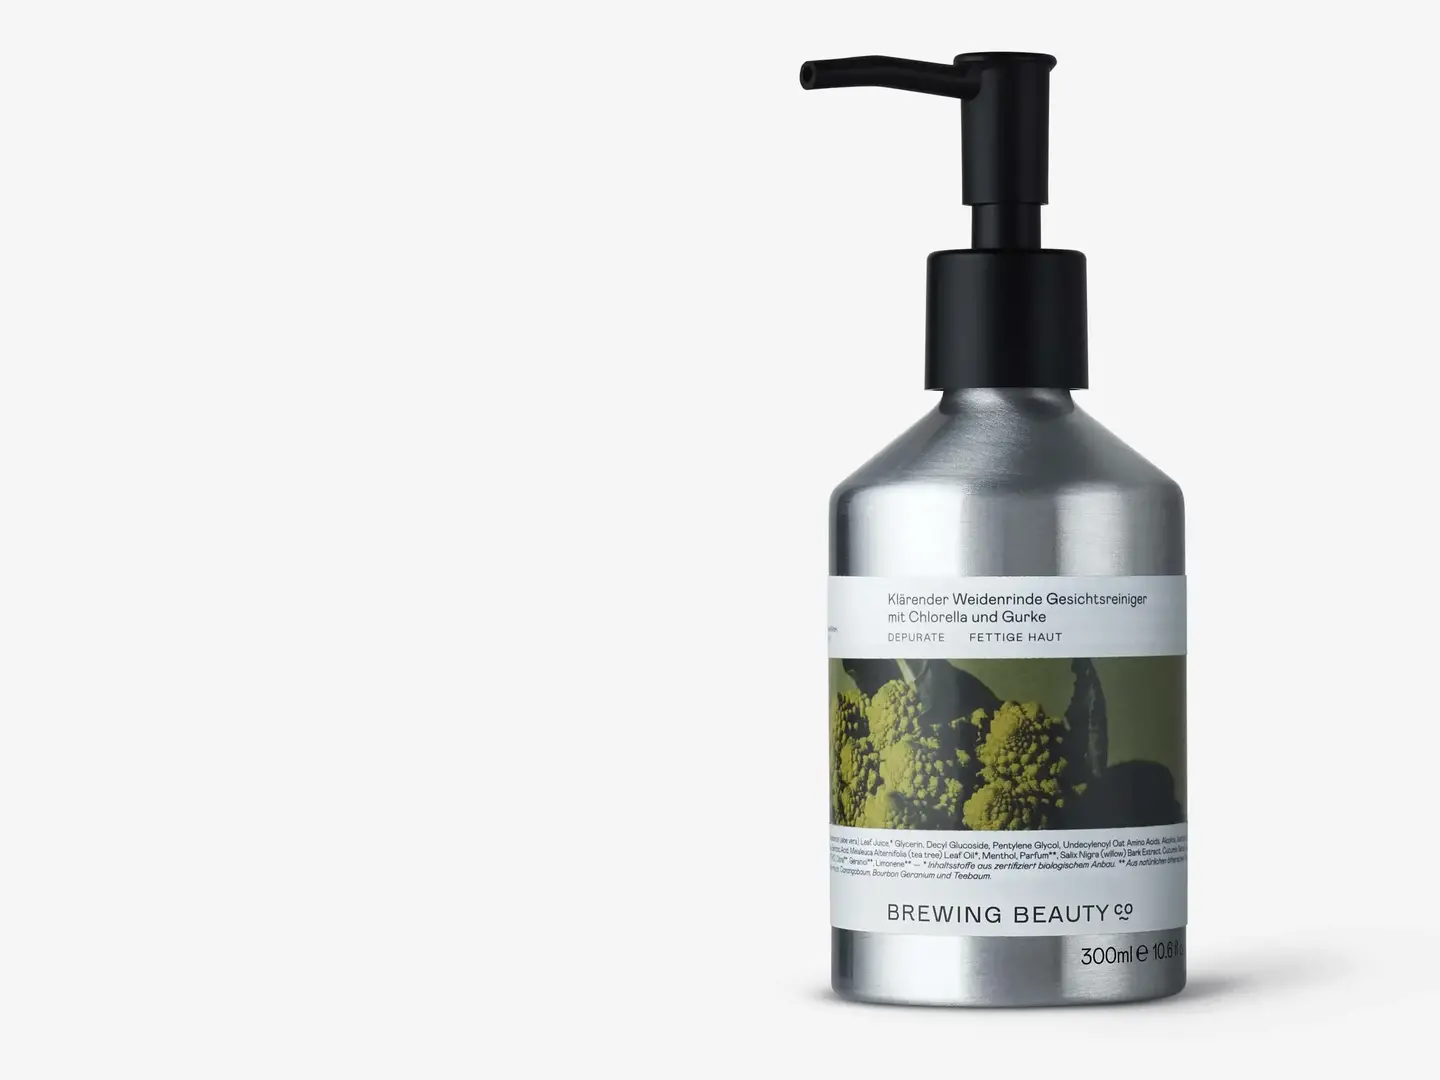 Cleanse with Purifying Willow Bark Face Cleanser